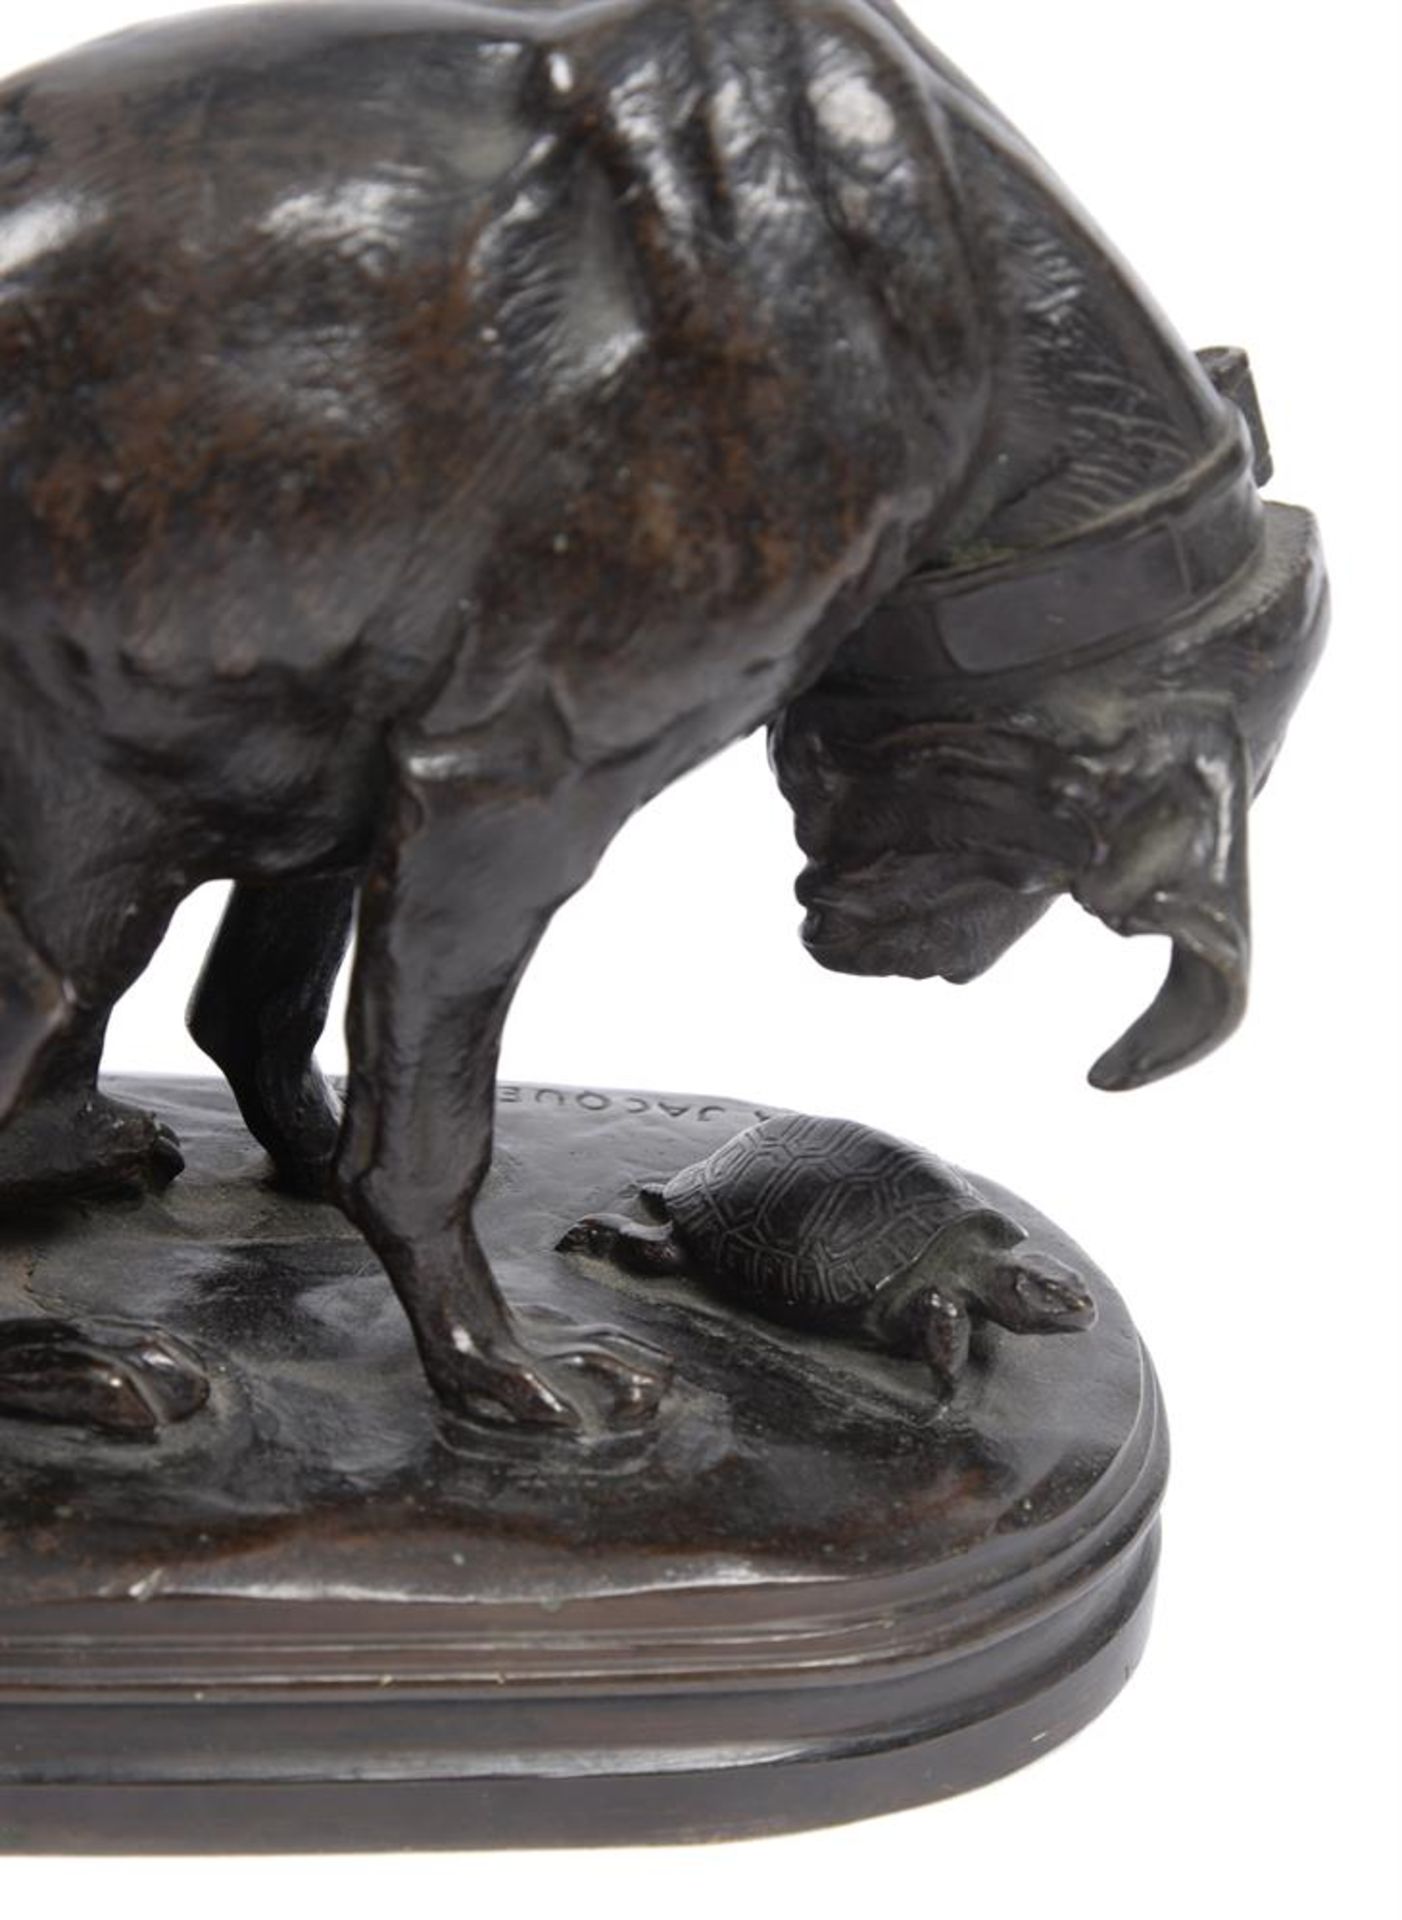 ALFRED JACQUEMART (FRENCH, 1824-1896), BRONZE FIGURE OF 'THE HOUND AND TORTOISE' - Image 3 of 4